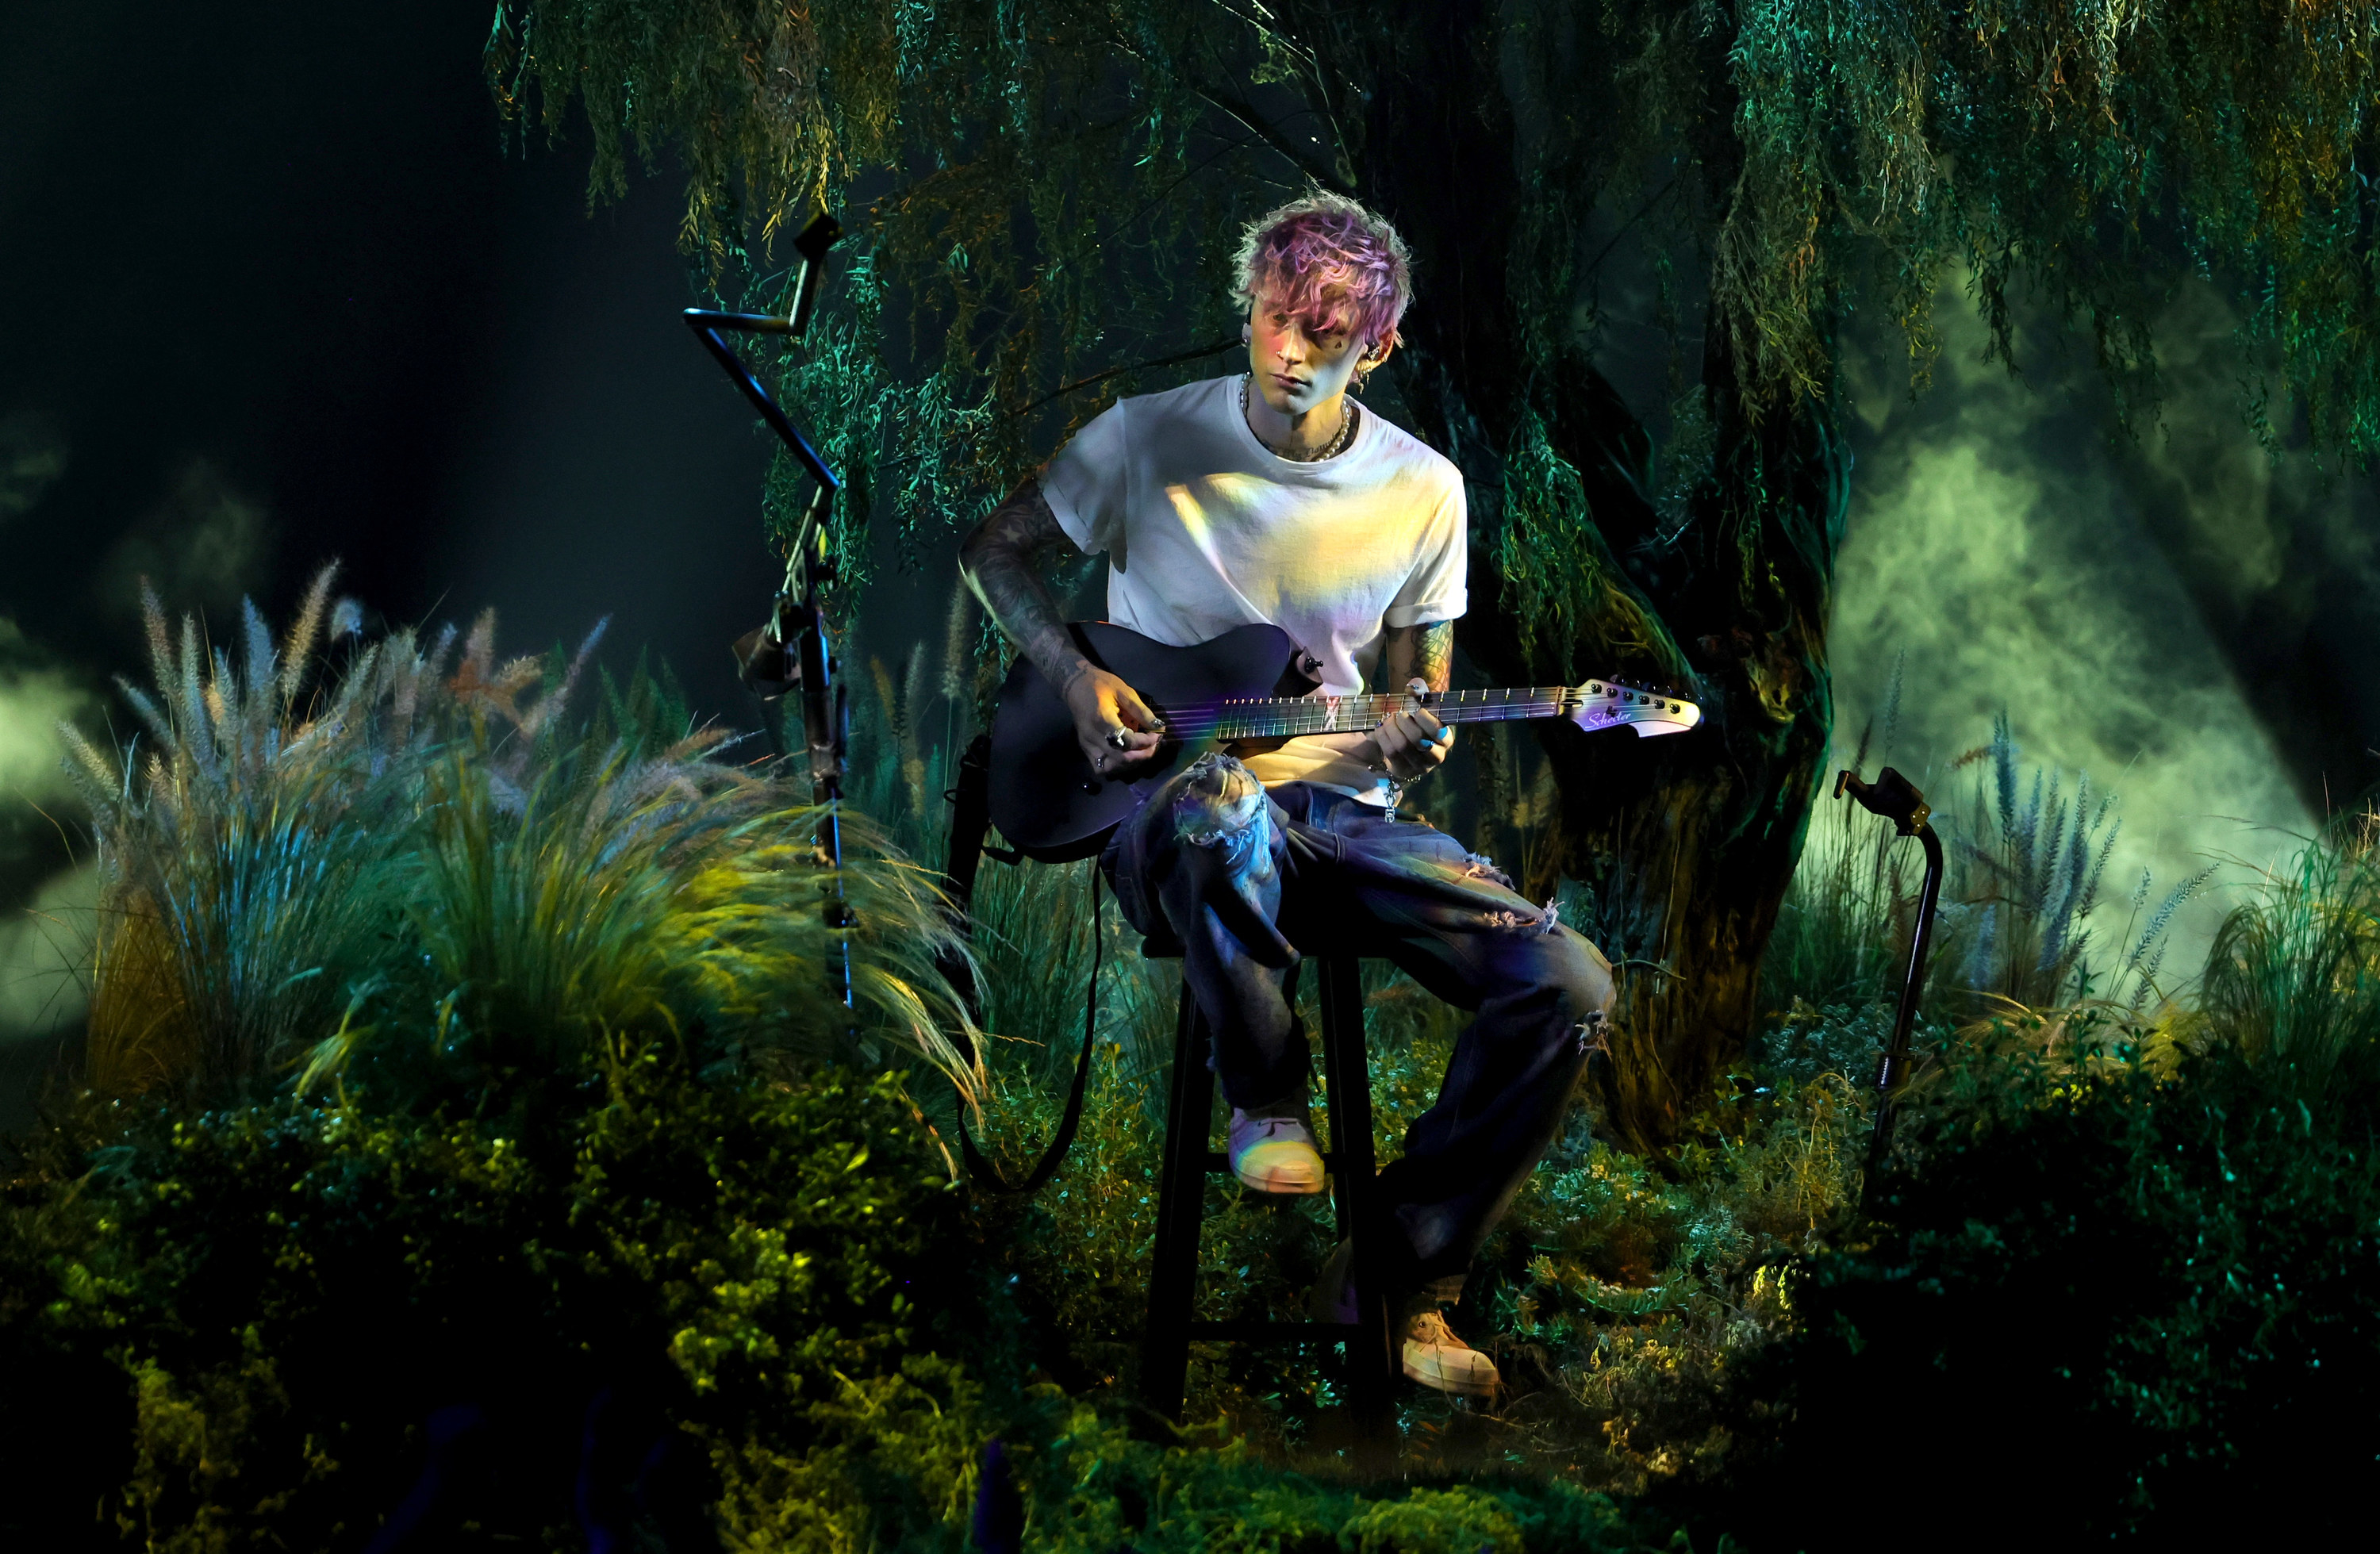 MGK sitting on a stool and performing against a backdrop of greenery